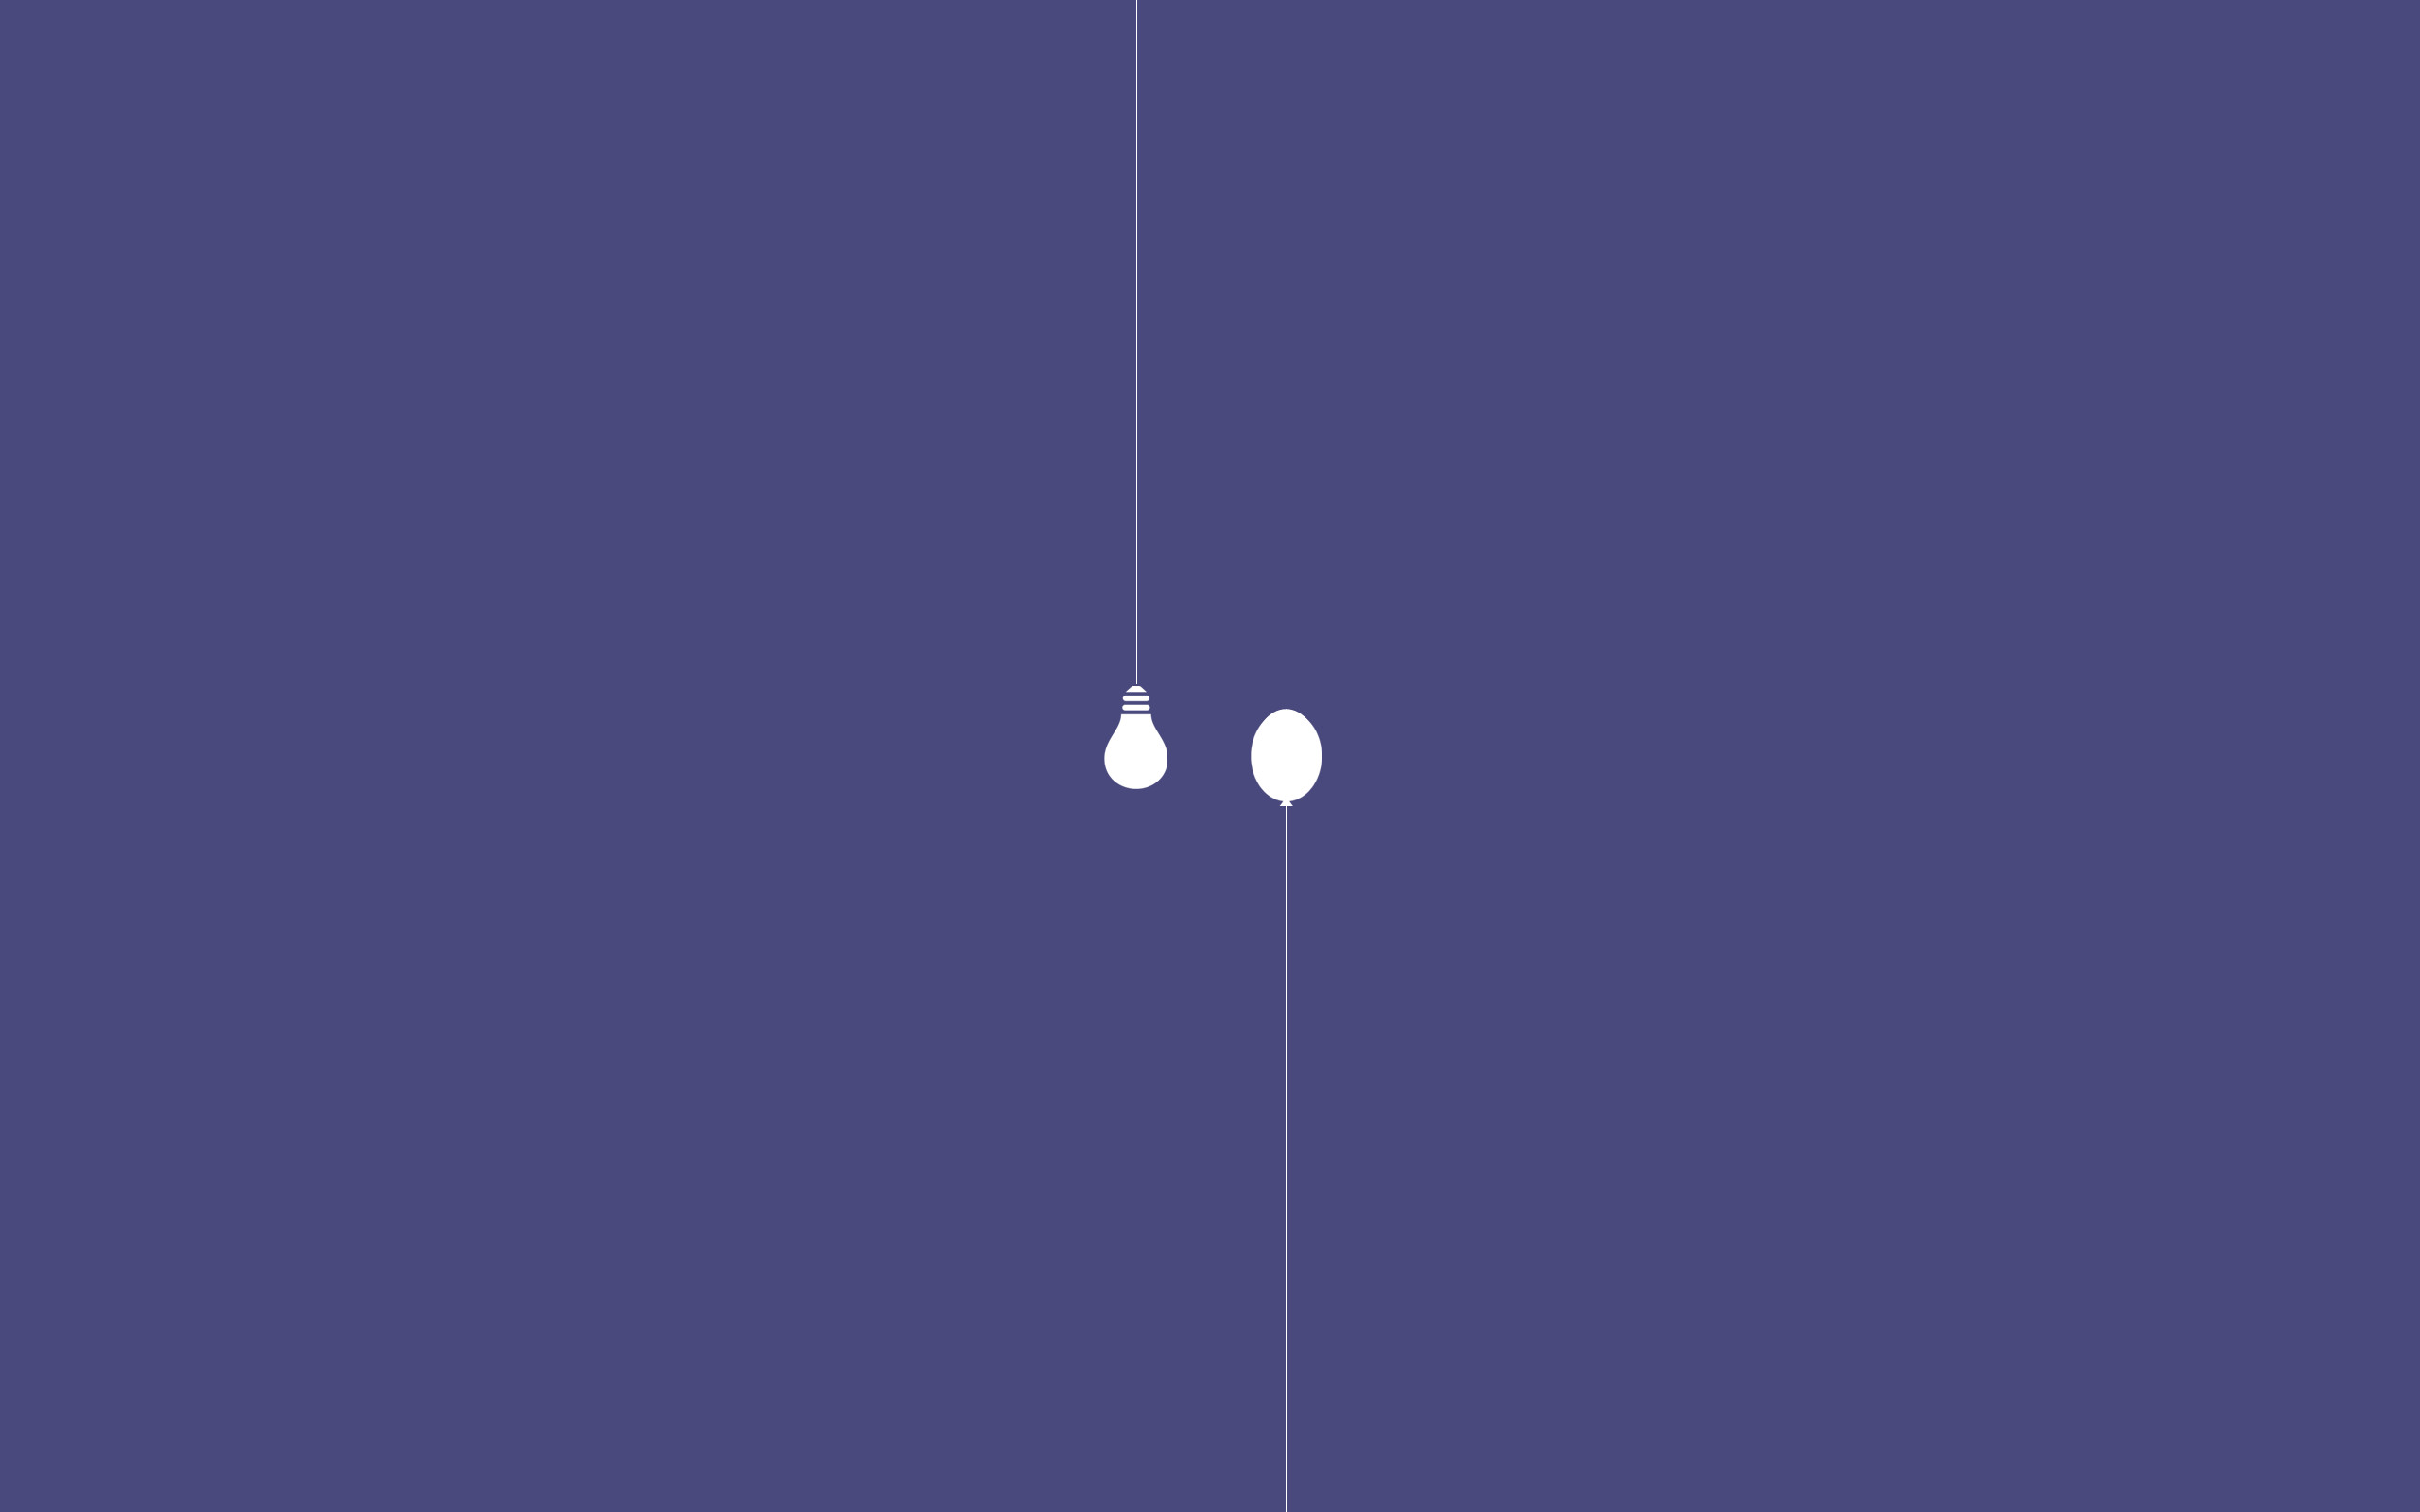 2560x1600 Bulb and Balloon. Found on Minimal Wallpapers